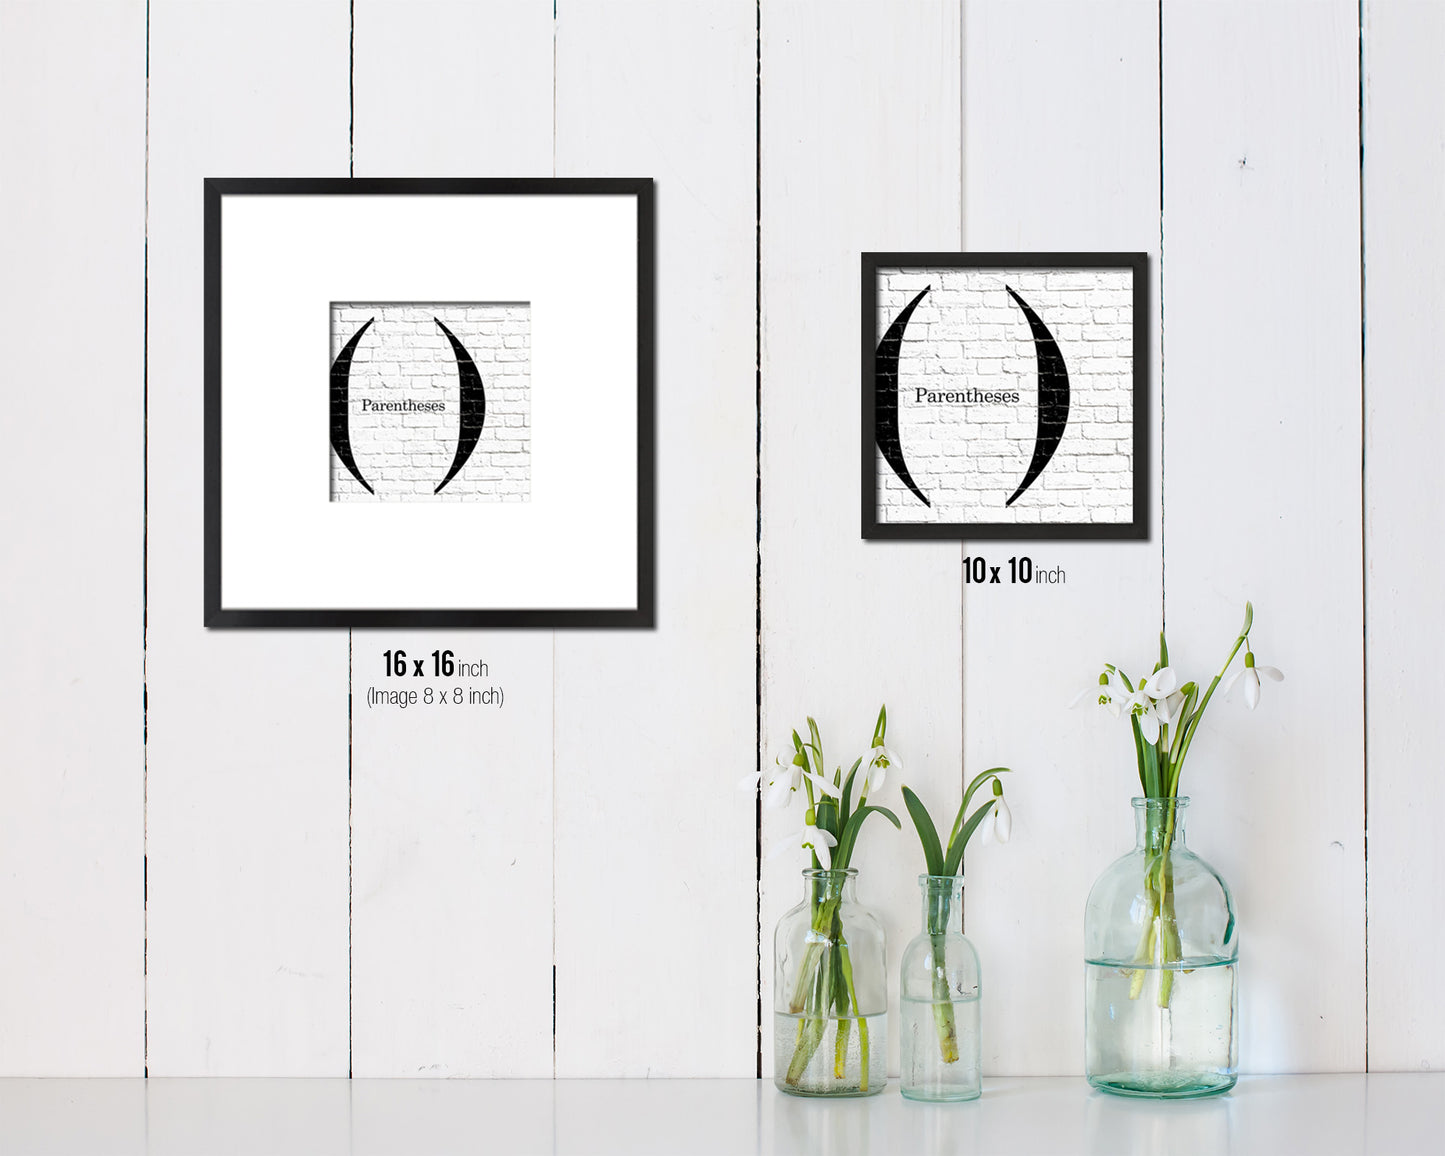 Parentheses Punctuation Symbol Framed Print Home Decor Wall Art English Teacher Gifts